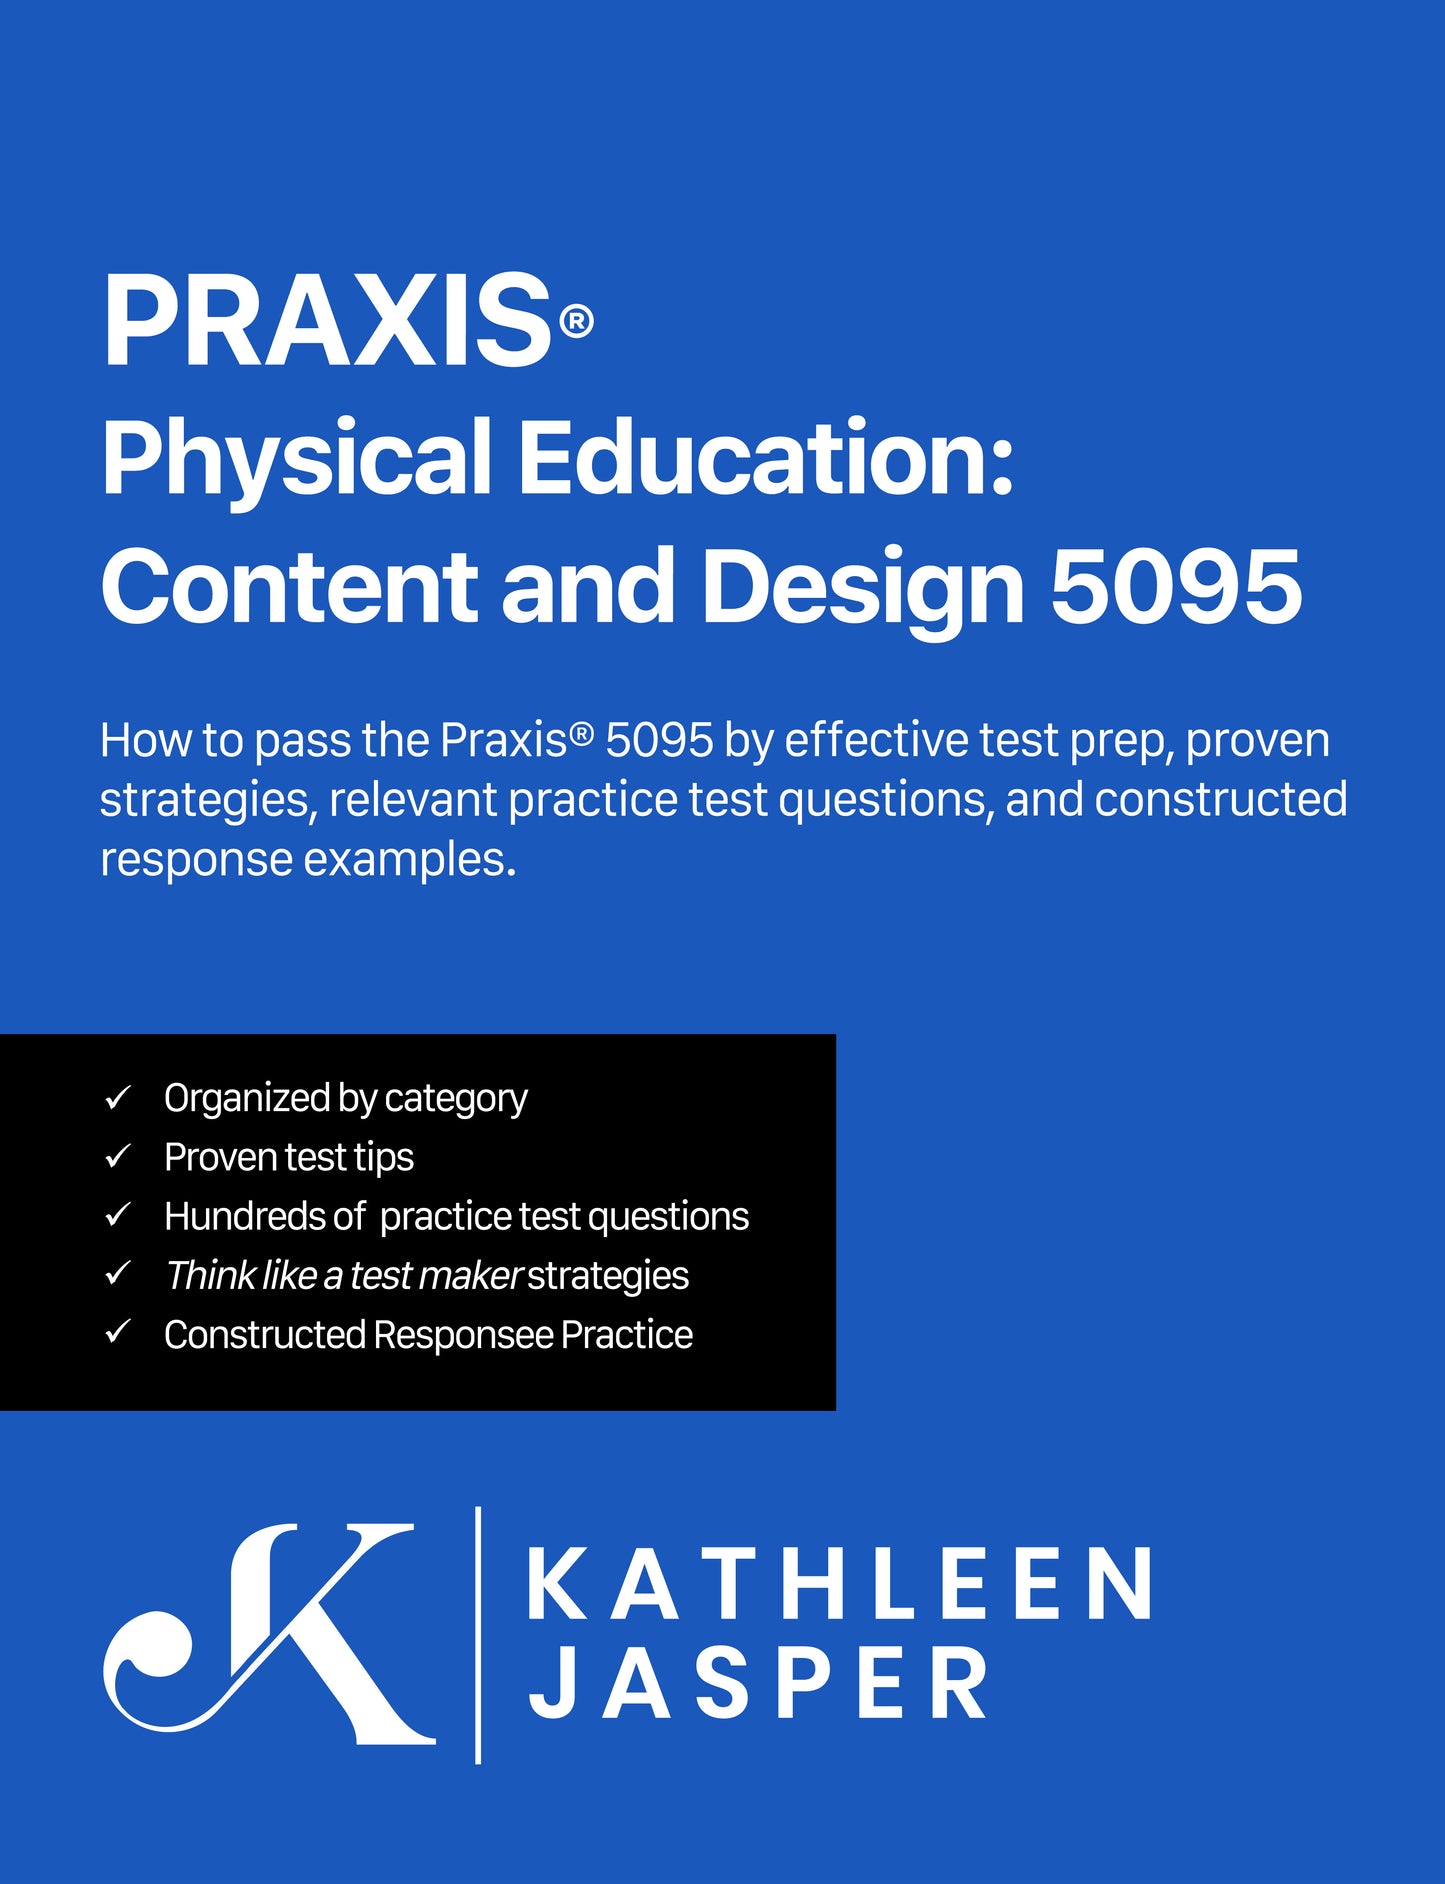 Praxis Physical Education: Content and Design 5095 - Digital Study Guide